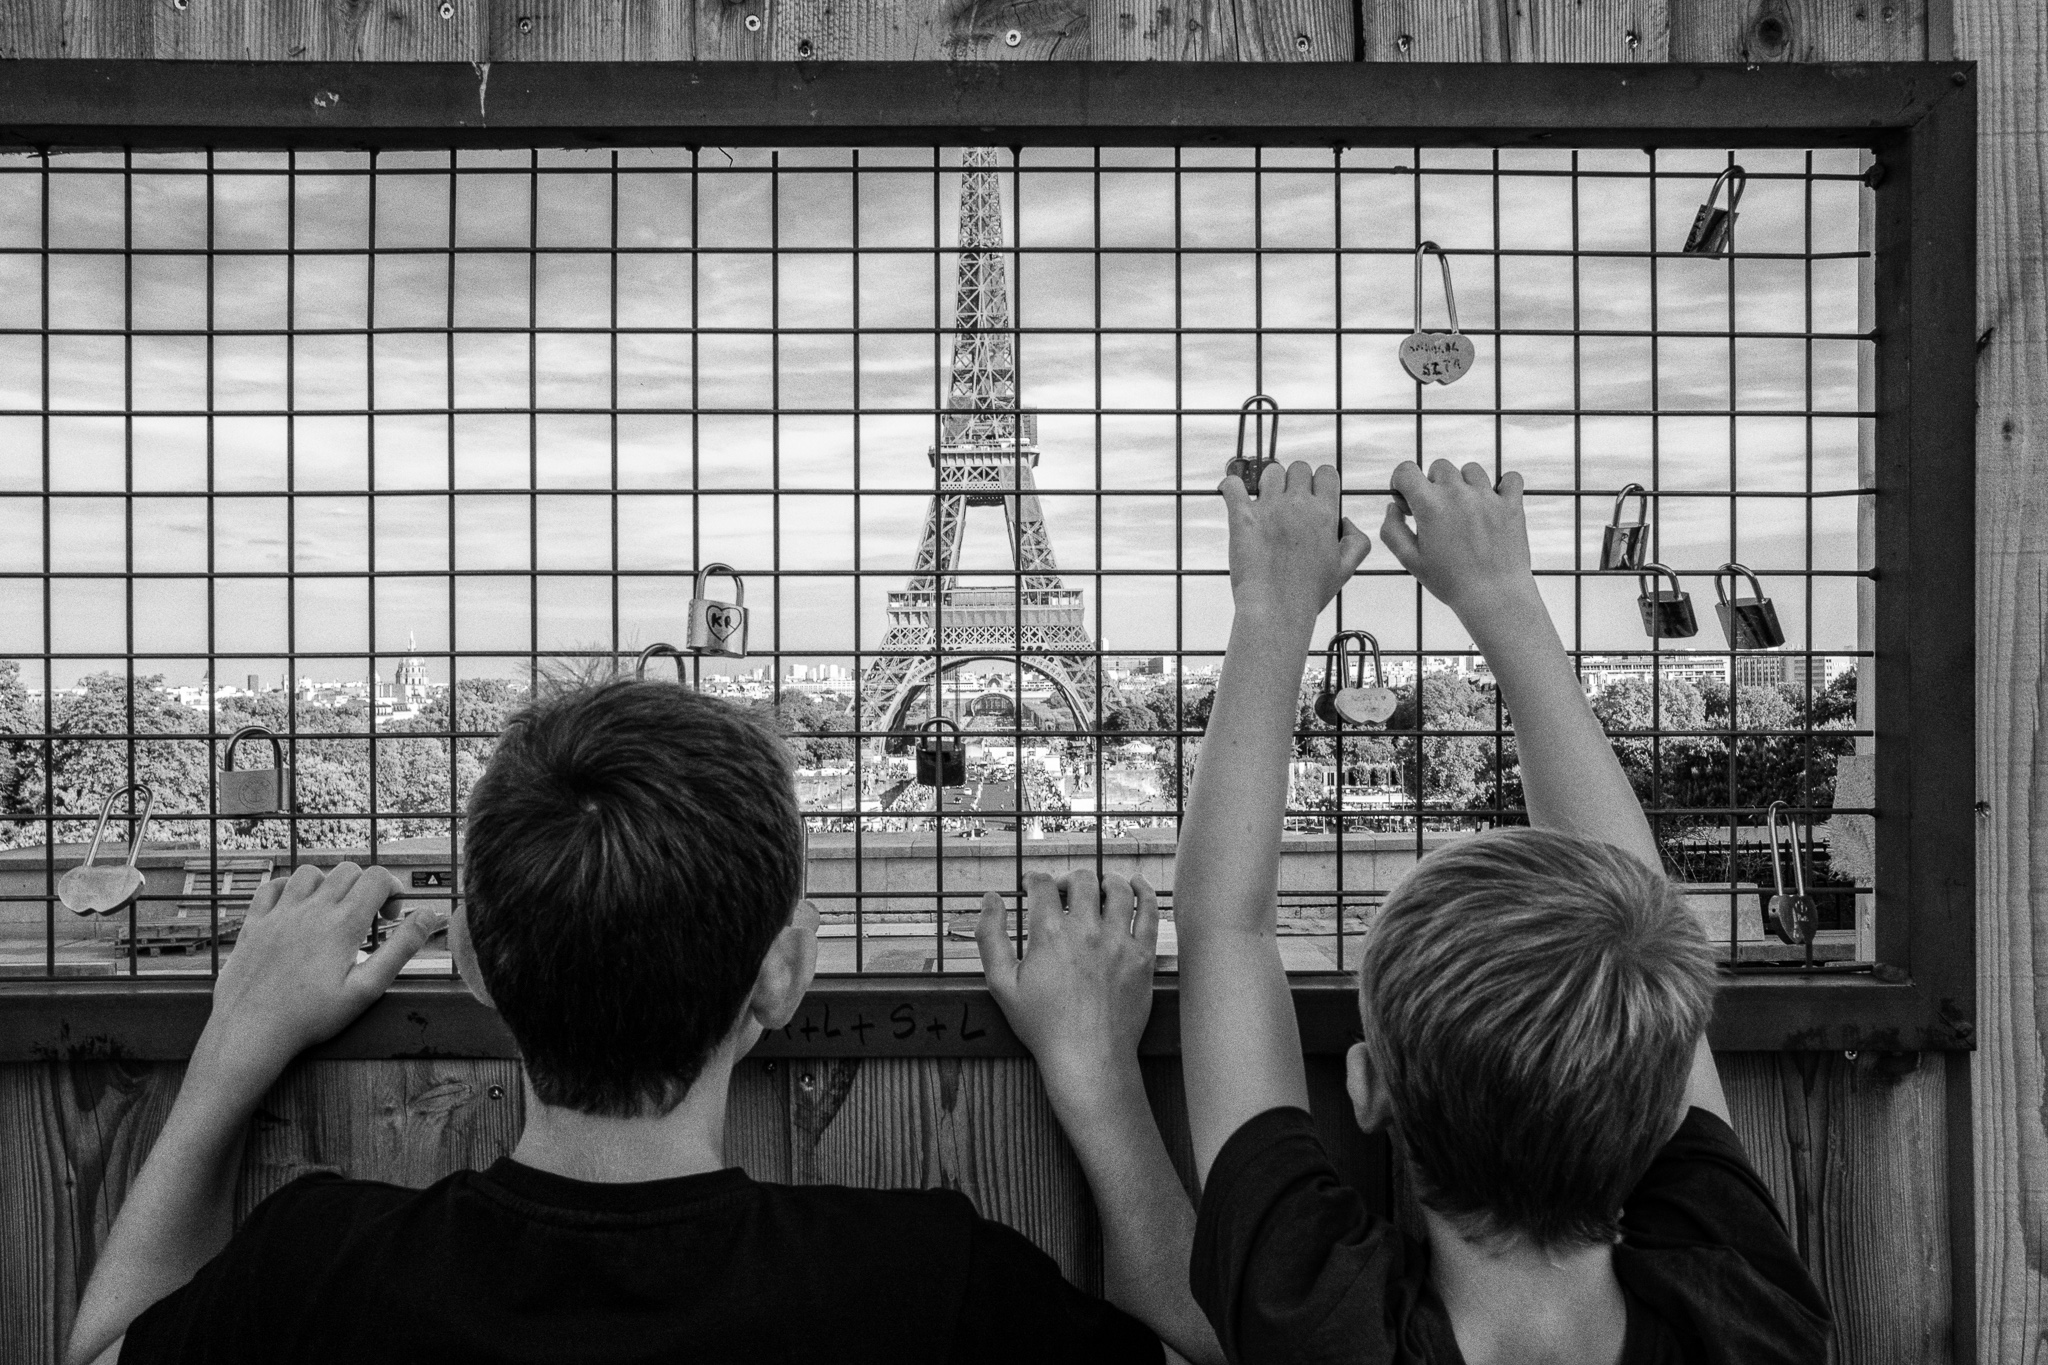 215 - Paris - 2022. "Two kids admiring the Tour Eiffel from behind an ugly fence." © Tommaso Carrara, Italy, entry, Open Competition, Street Photography, 2023 Sony World Photography Awards